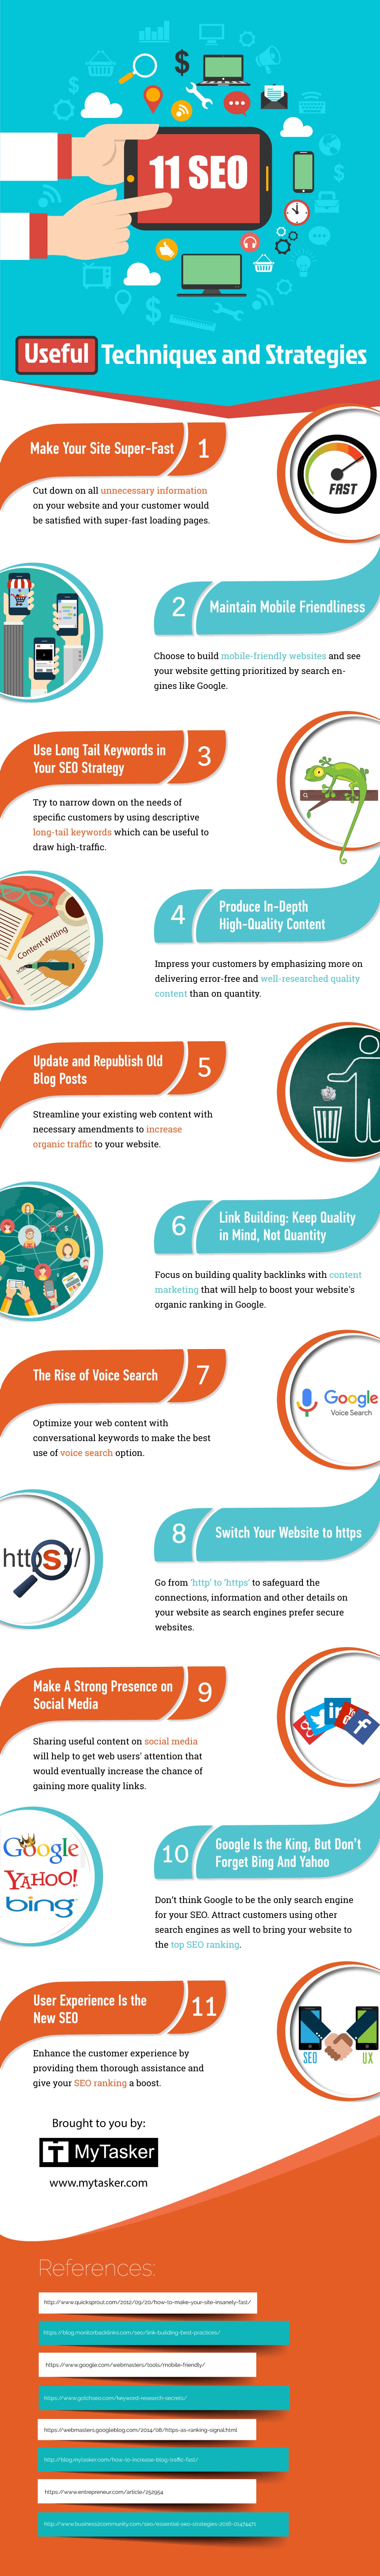 Infographic: 11 Useful SEO Techniques and Strategies